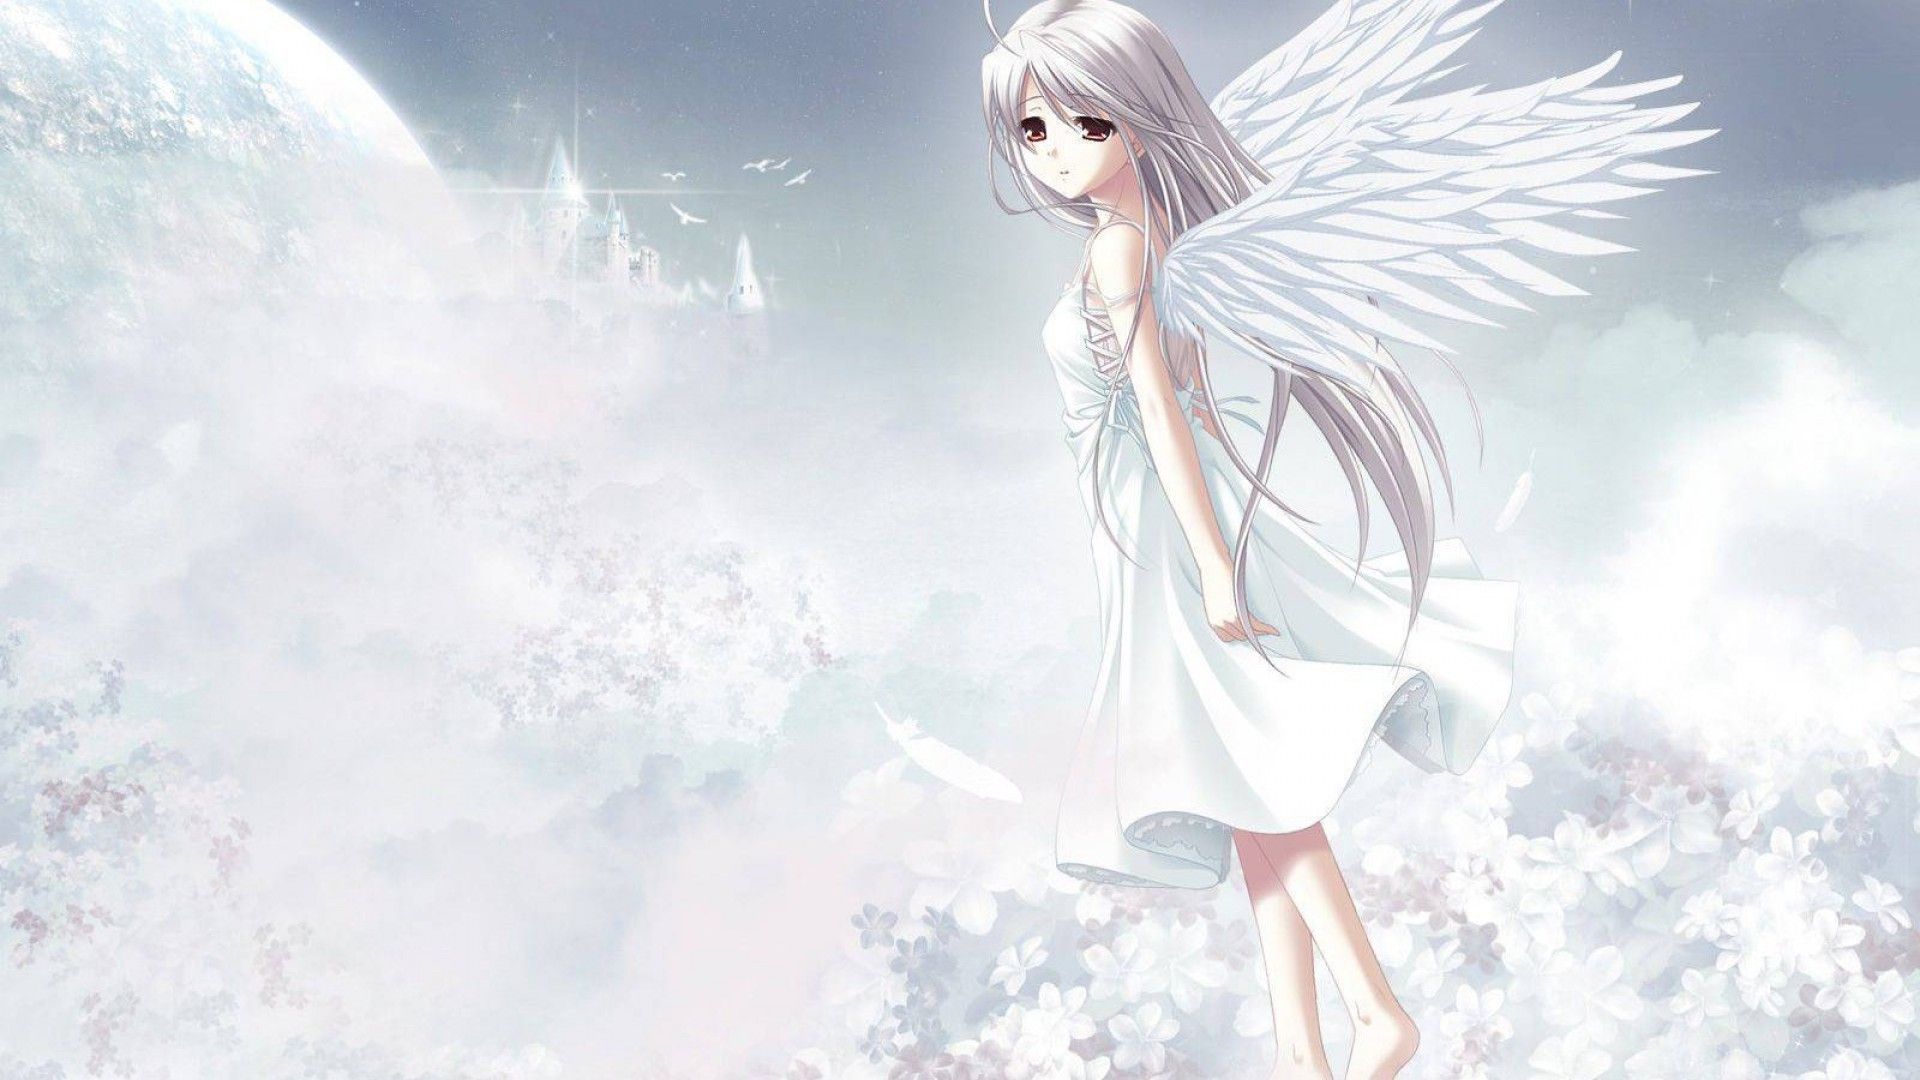 Cute Anime wallpaper HDDownload free stunning High Resolution